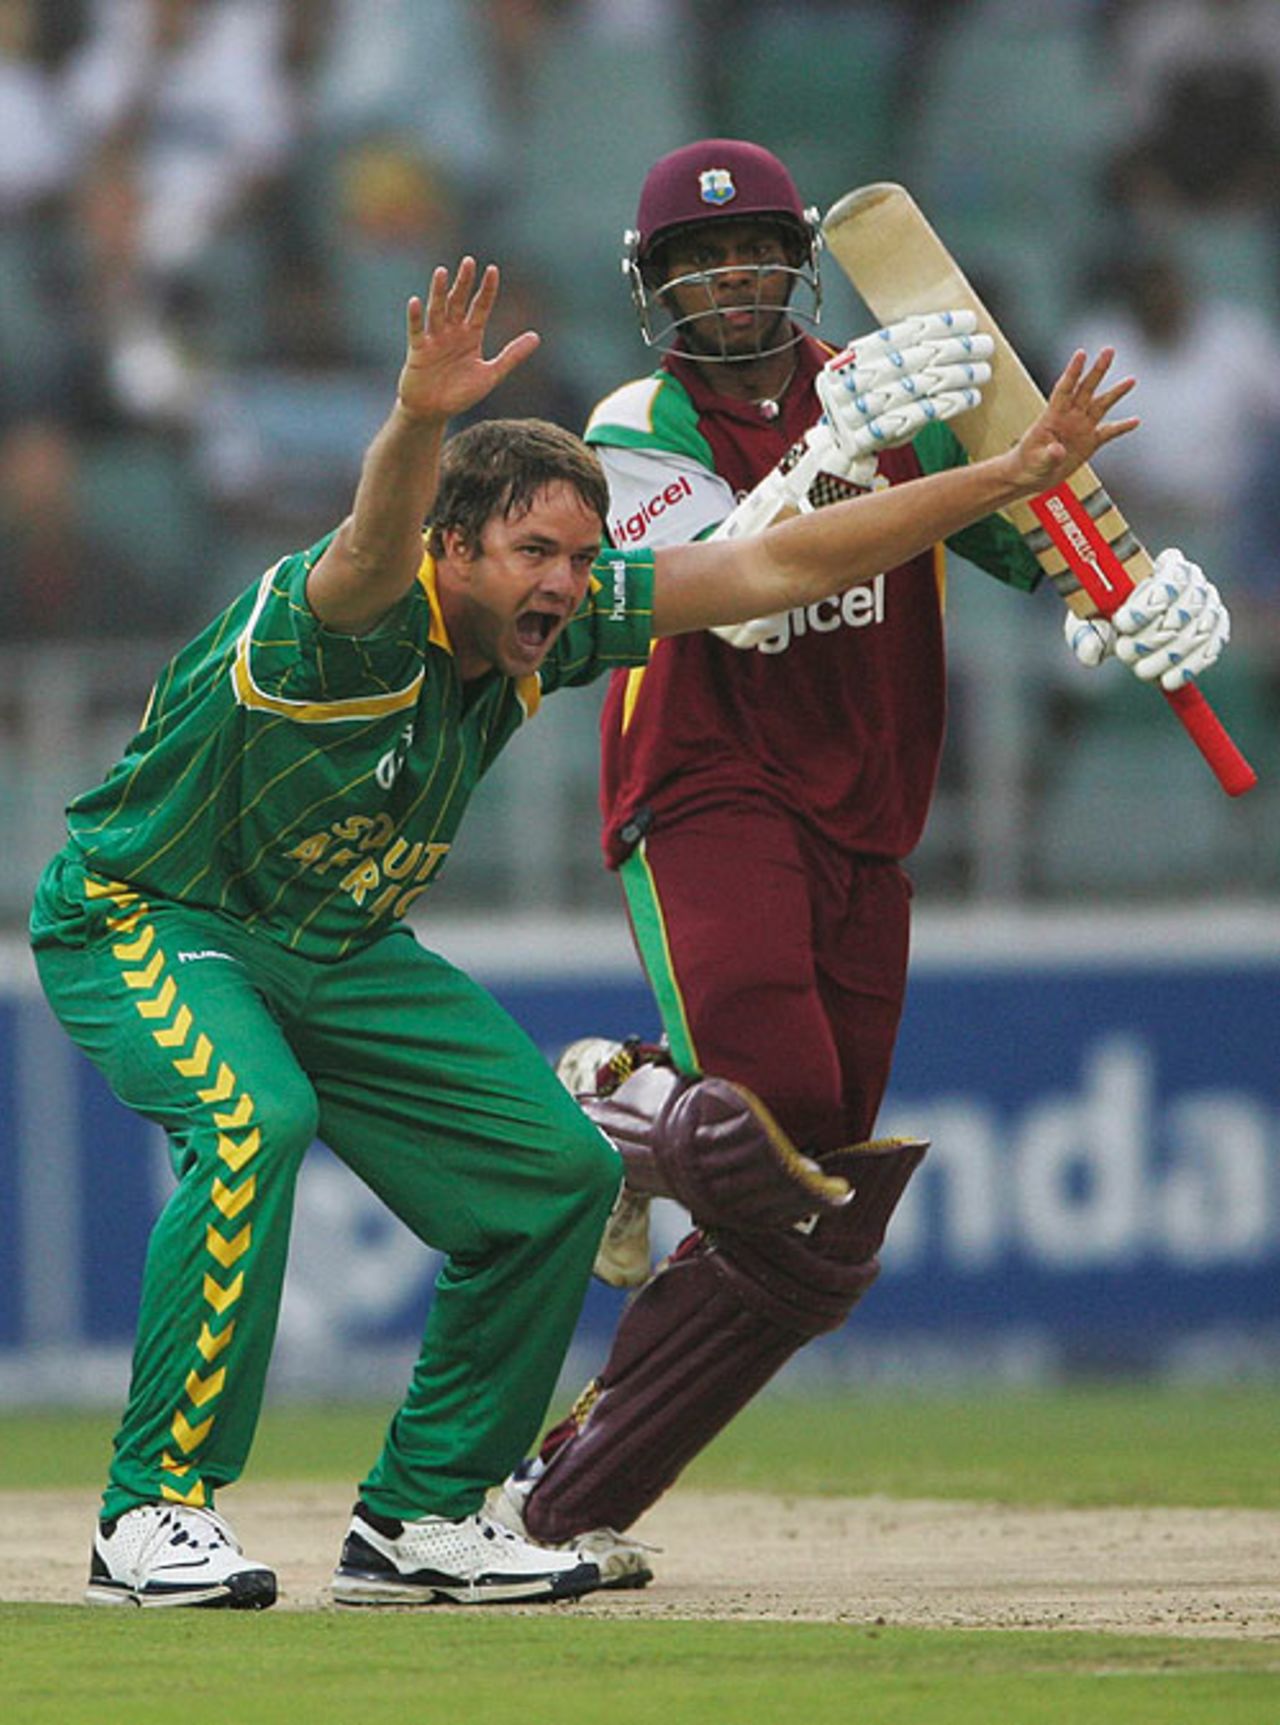 Albie Morkel appeals for the wicket of Shivnarine Chanderpaul, South Africa v West Indies, 2nd Twenty20, Johannesburg, January 18, 2008